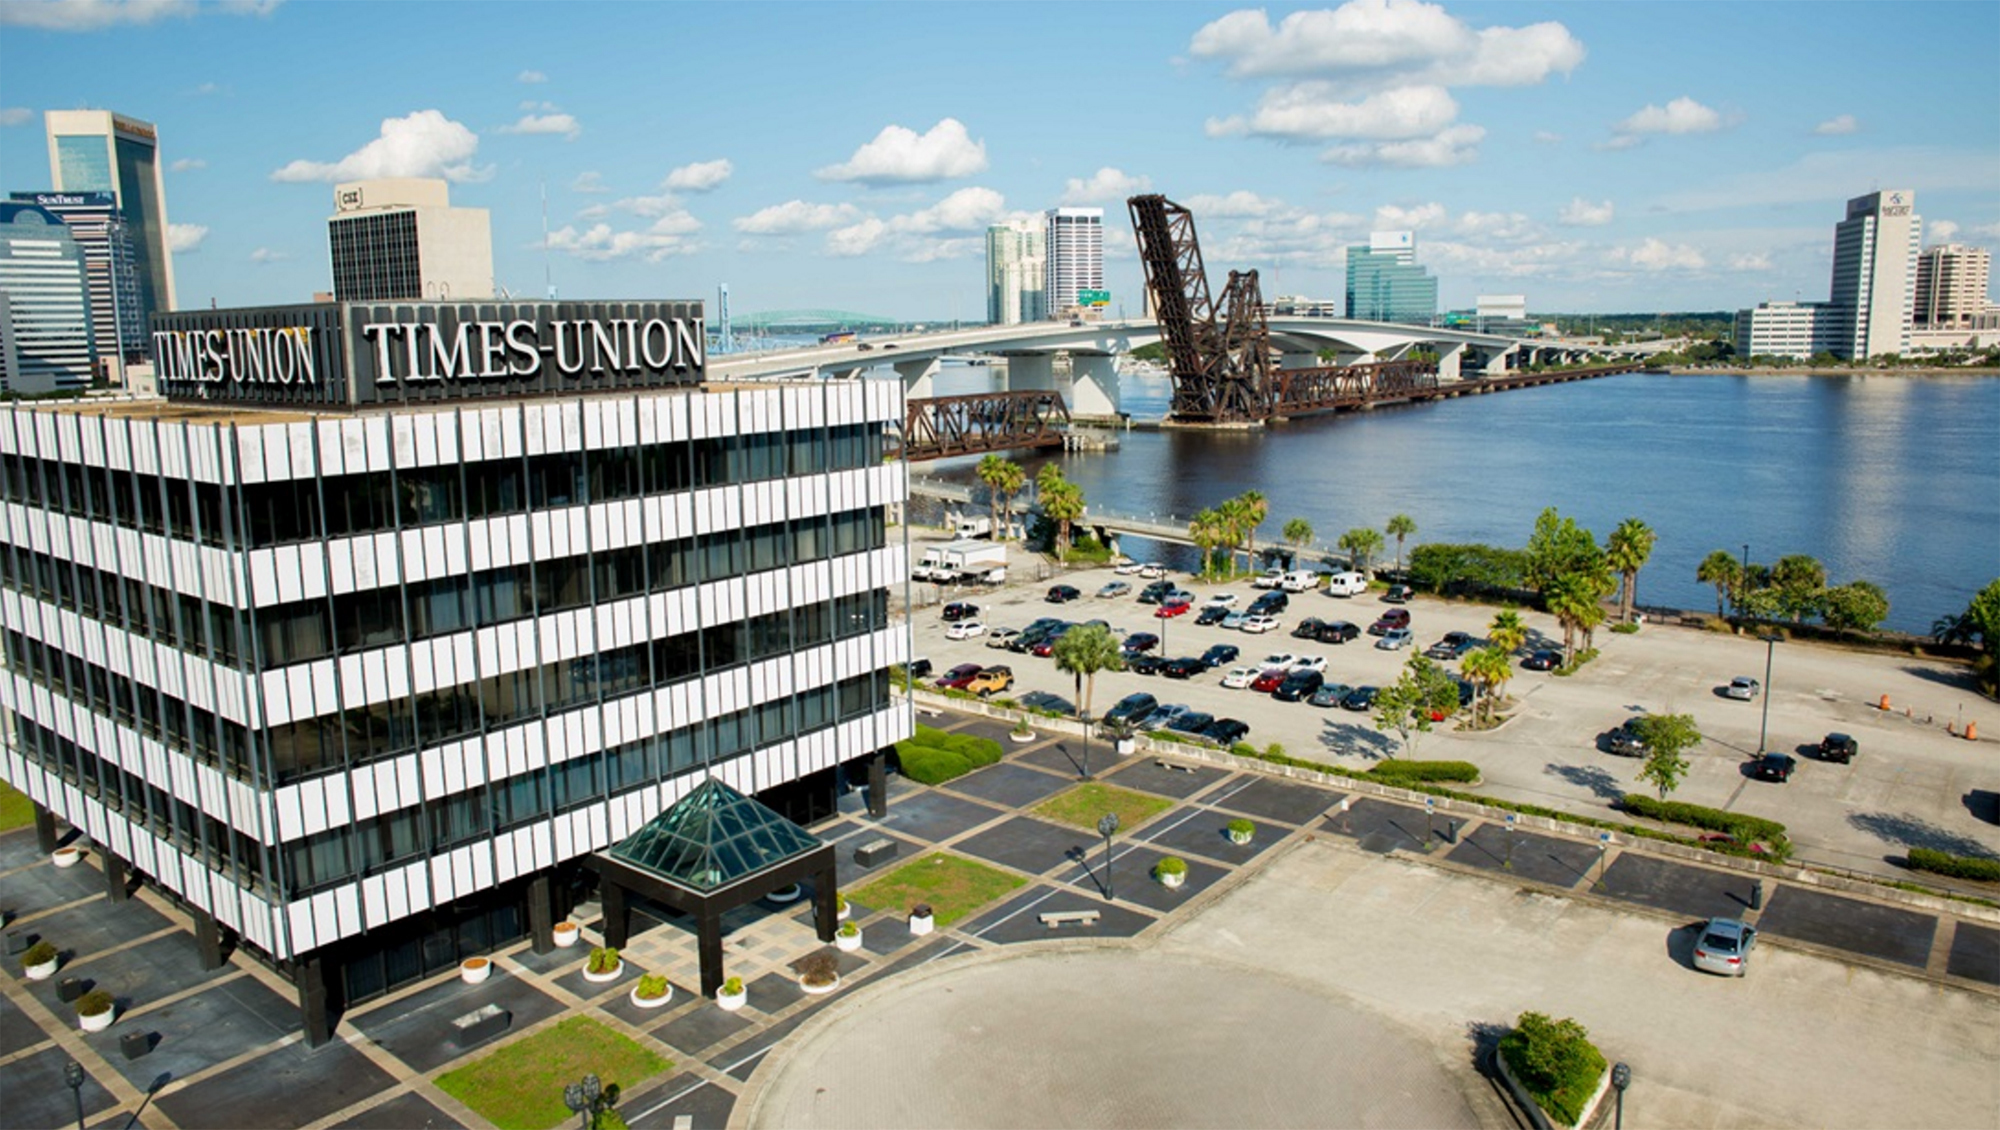 The Florida Times-Union left the property in April 2019 and moved to Wells Fargo Center Downtown.